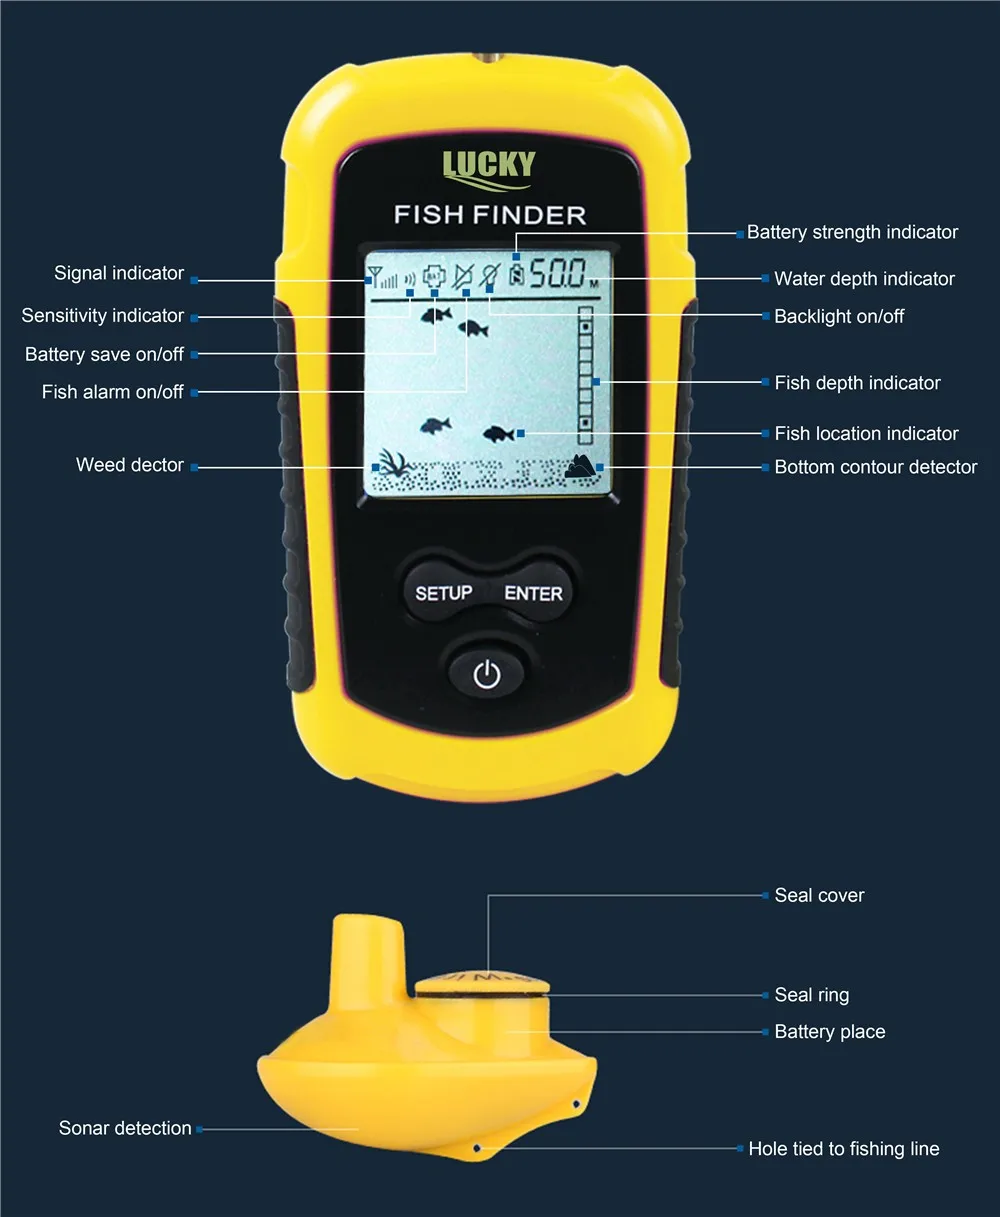 

Lucky FFW1108-1 Colorful Wireless Sonar Fish Finder Portable Fishing Accessories for Fishing, Yellow